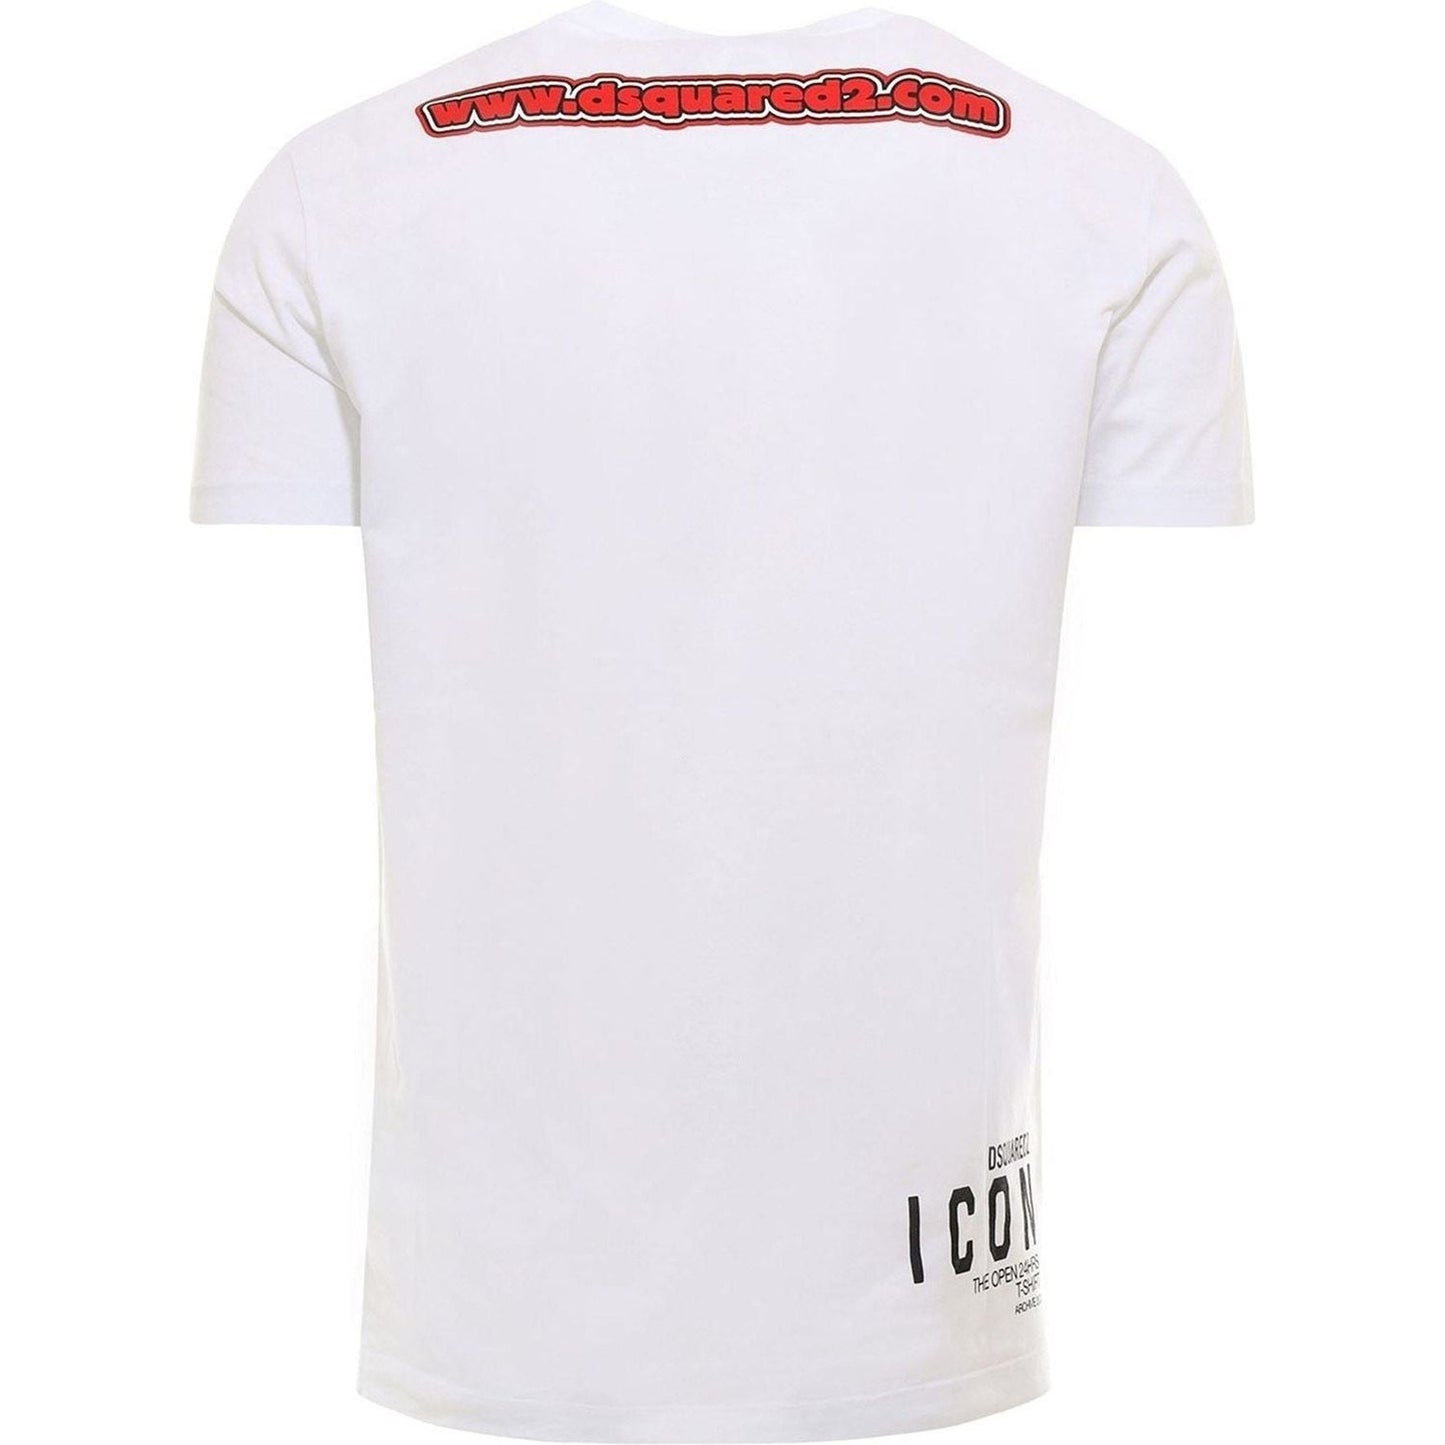 Dsquared² Elevated White Cotton Roundneck T-Shirt s-dsquared-t-shirt-1 stock_product_image_6137_1130897321-2-bc3764d7-5bf.jpg